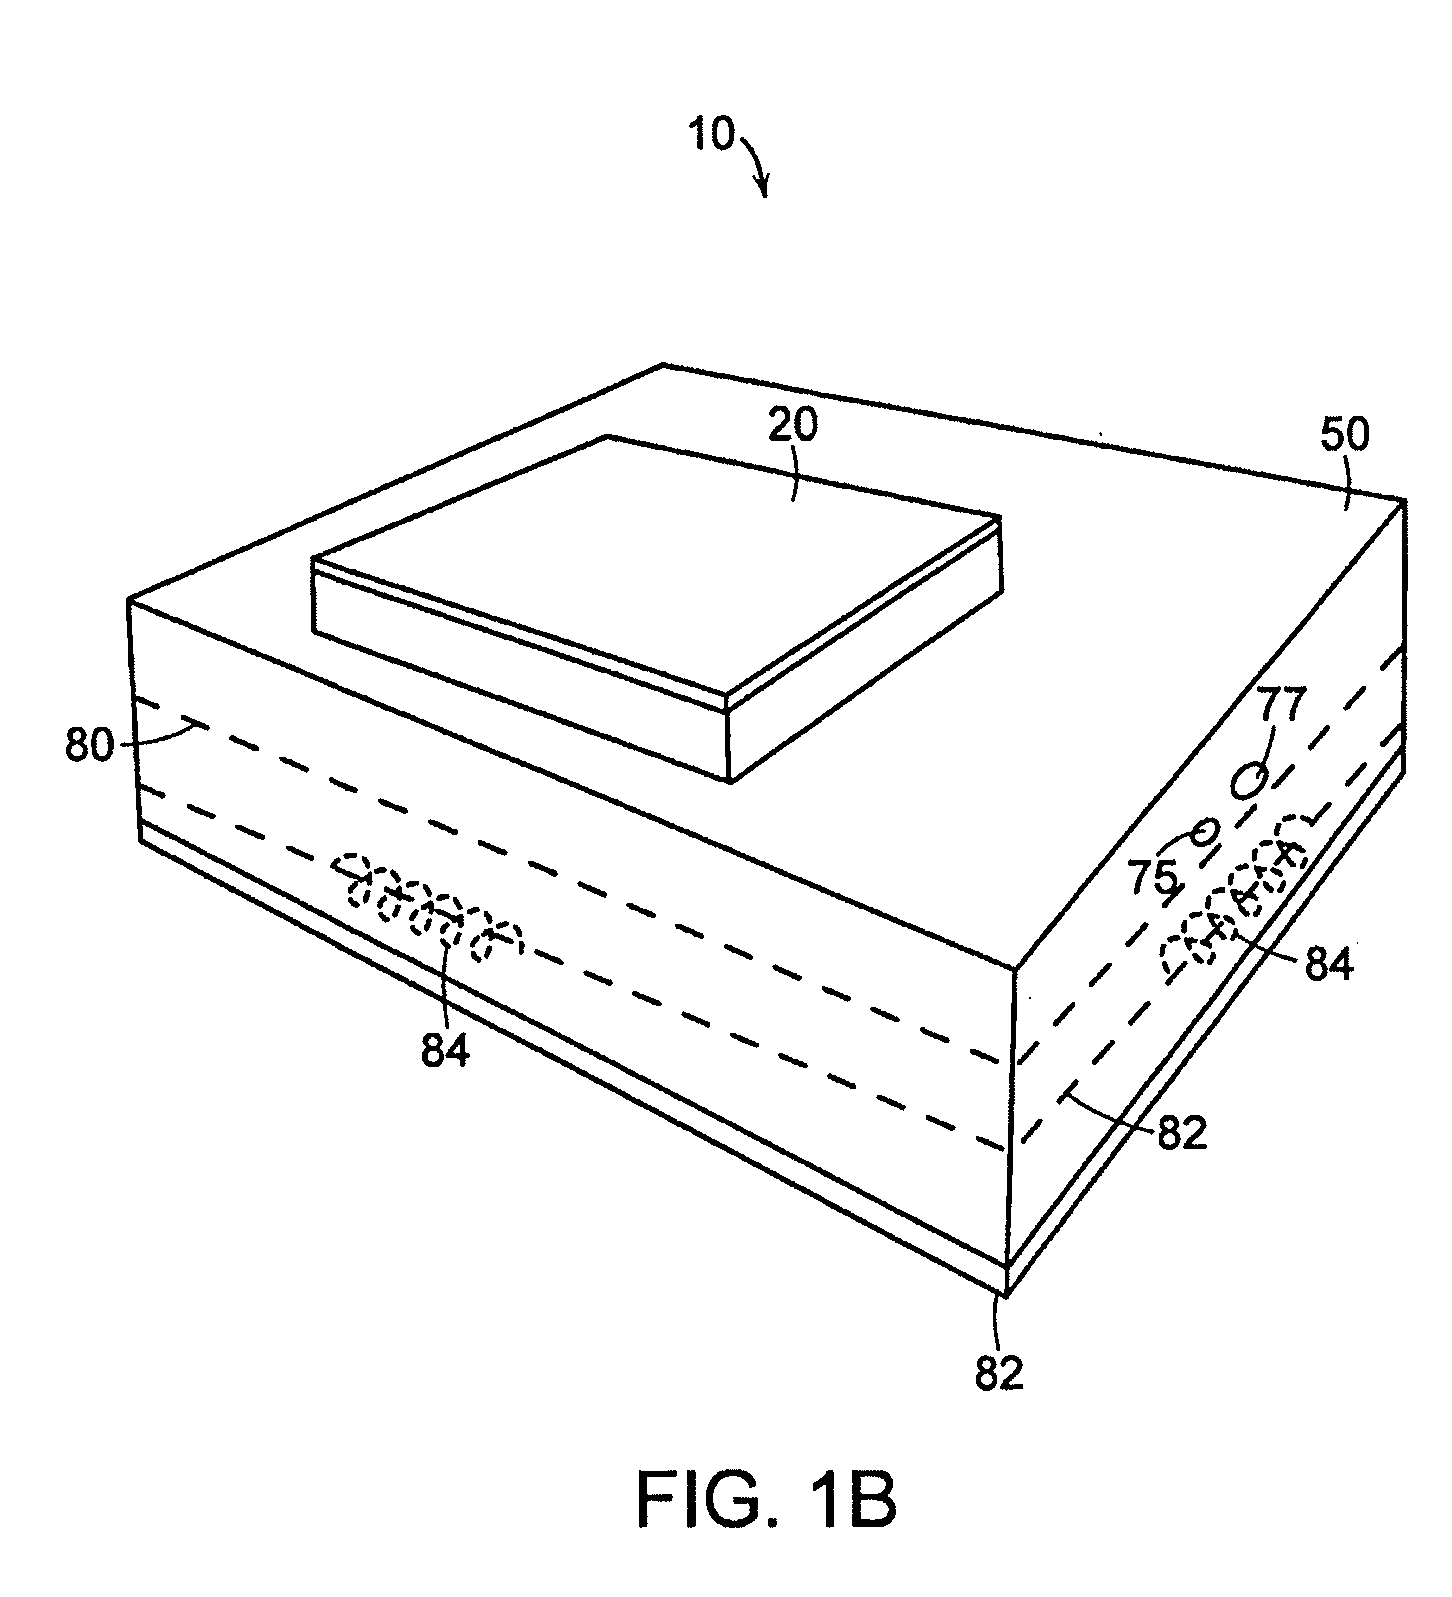 Ruggedized apparatus for analysis of nucleic acid and proteins